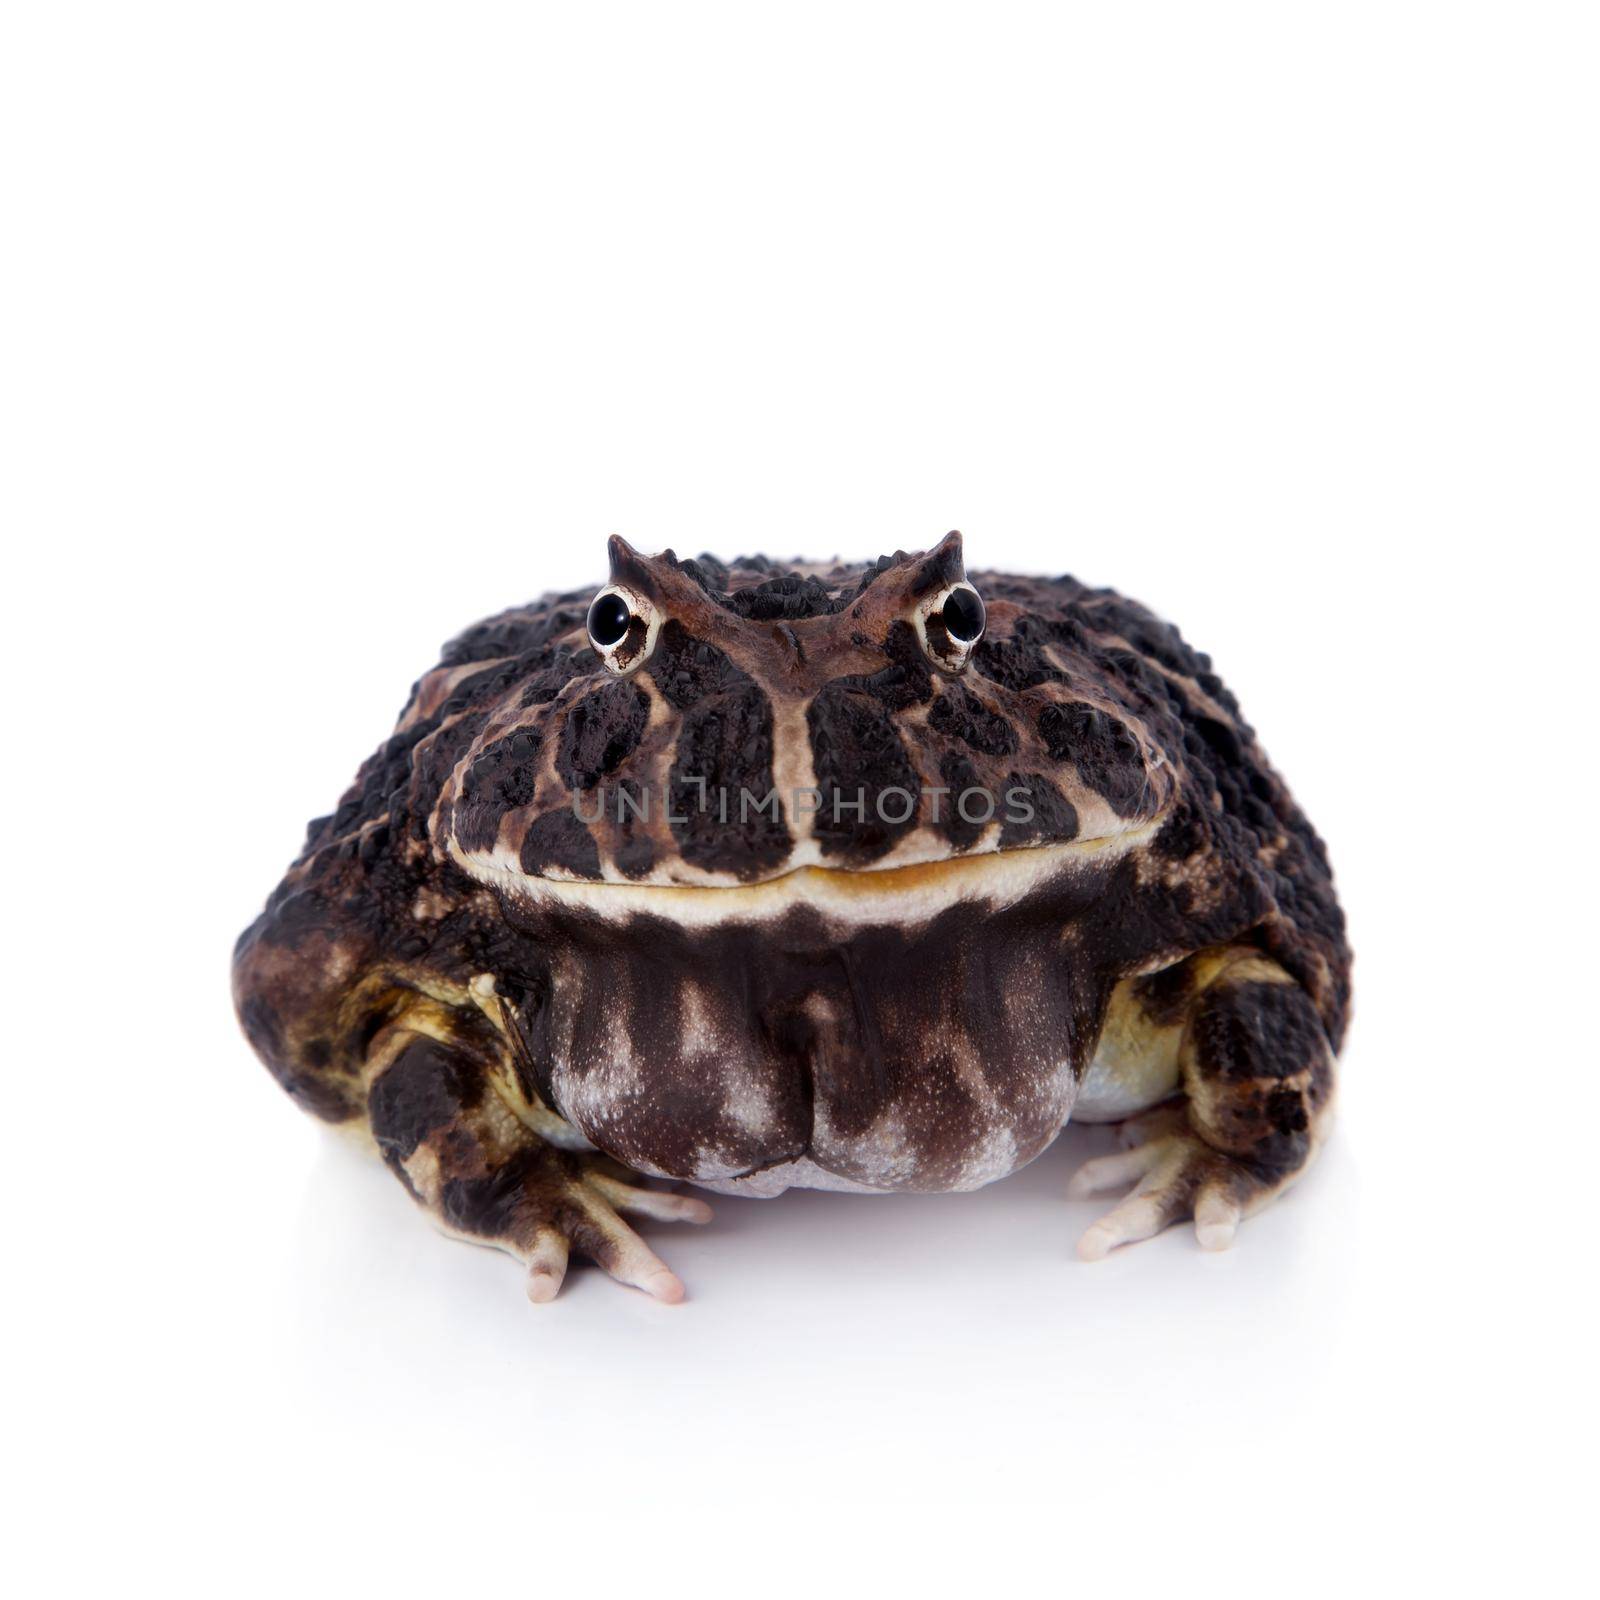 The Argentine horned frog on white by RosaJay